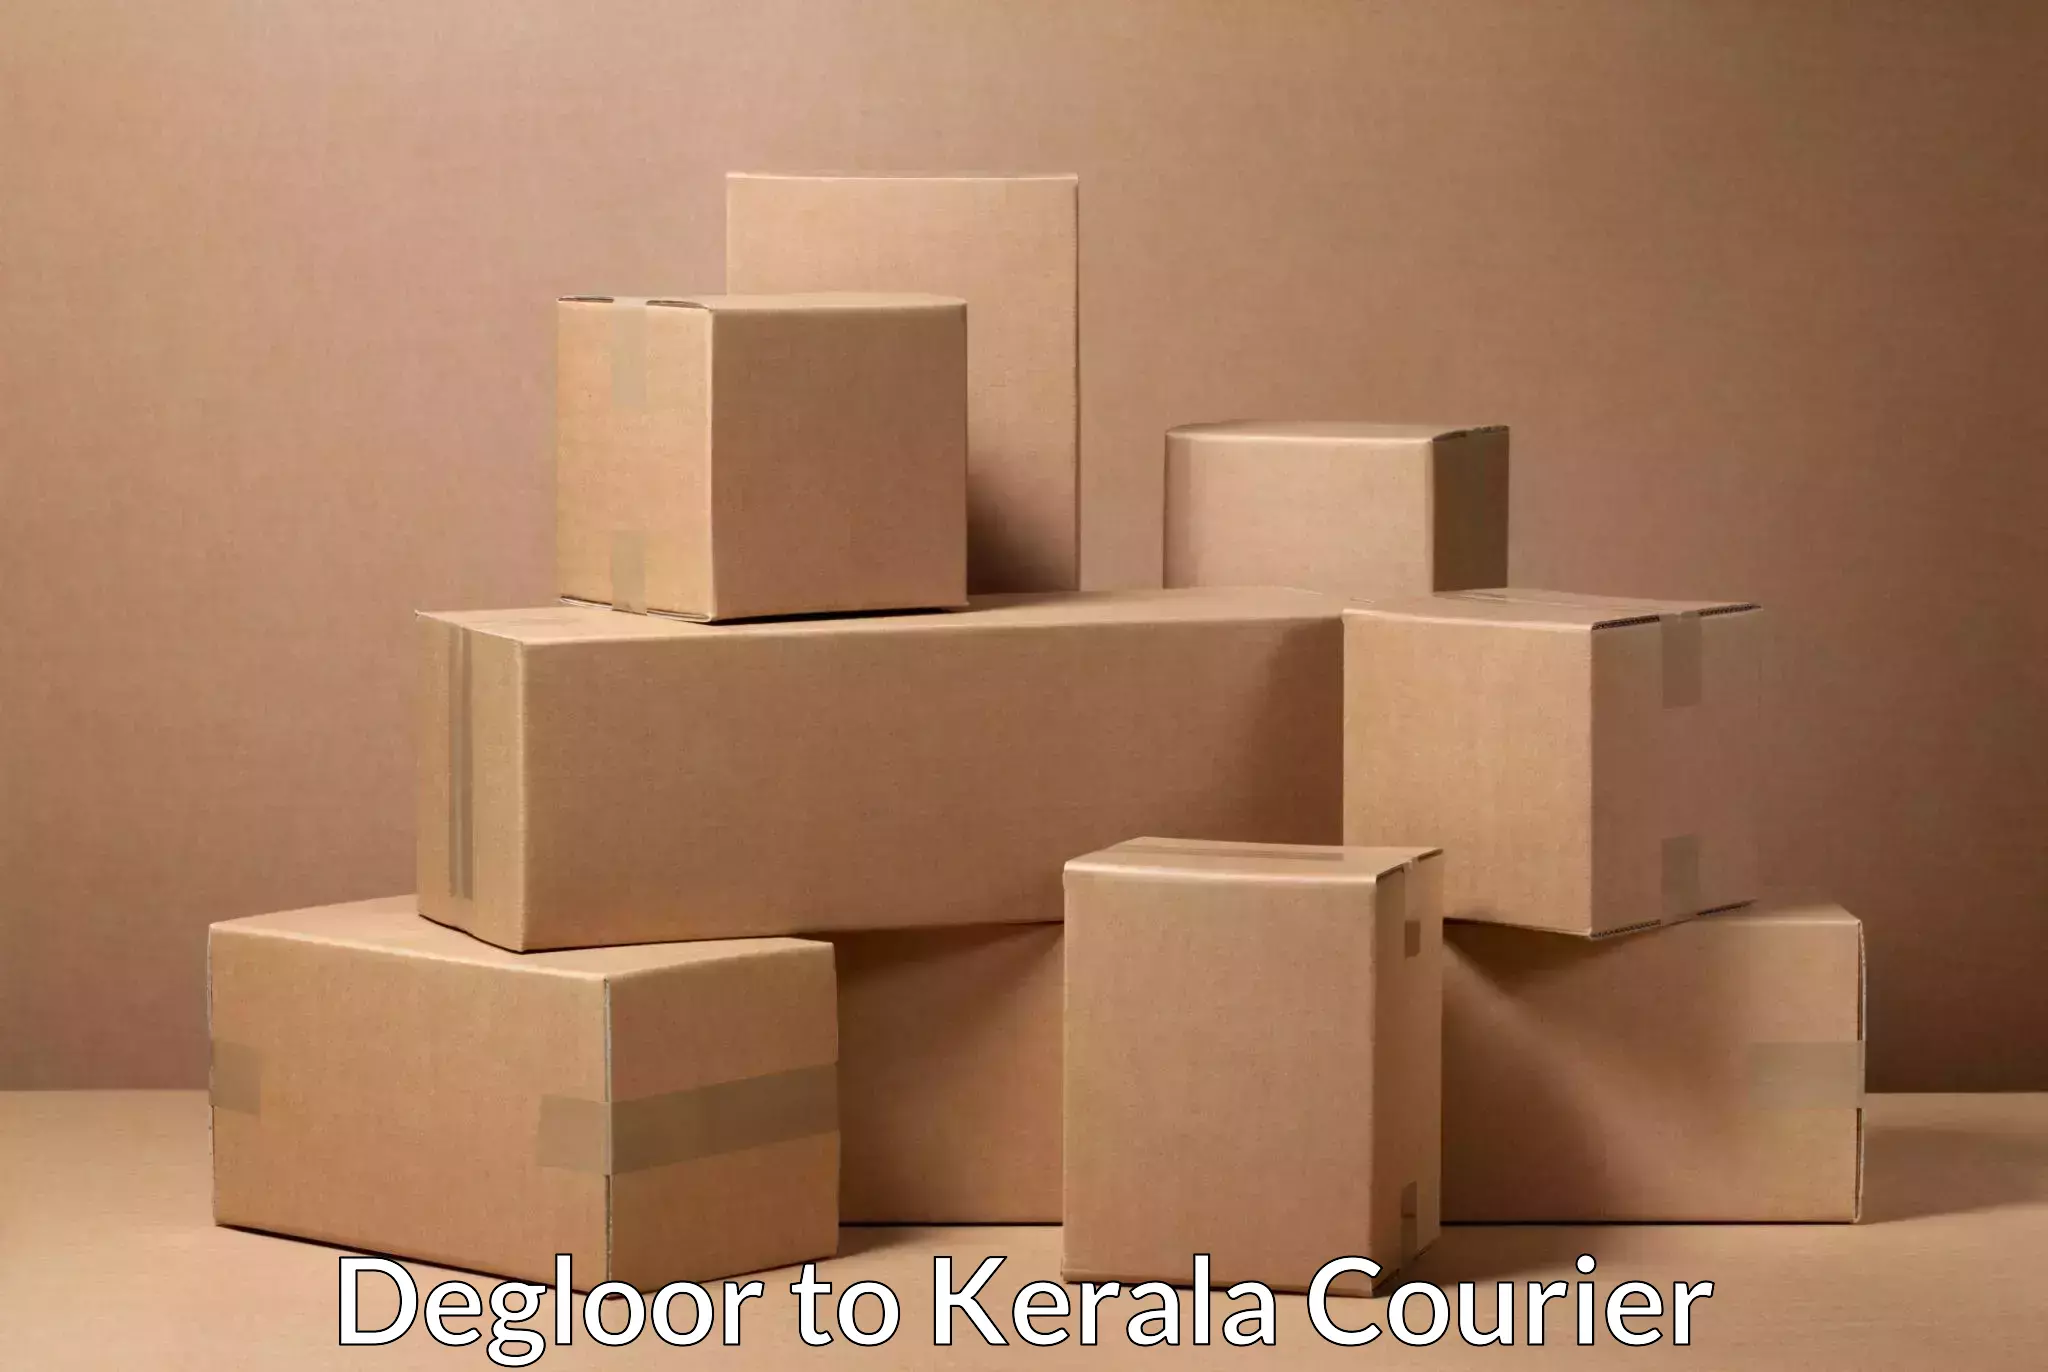 Nationwide courier service Degloor to Cherthala